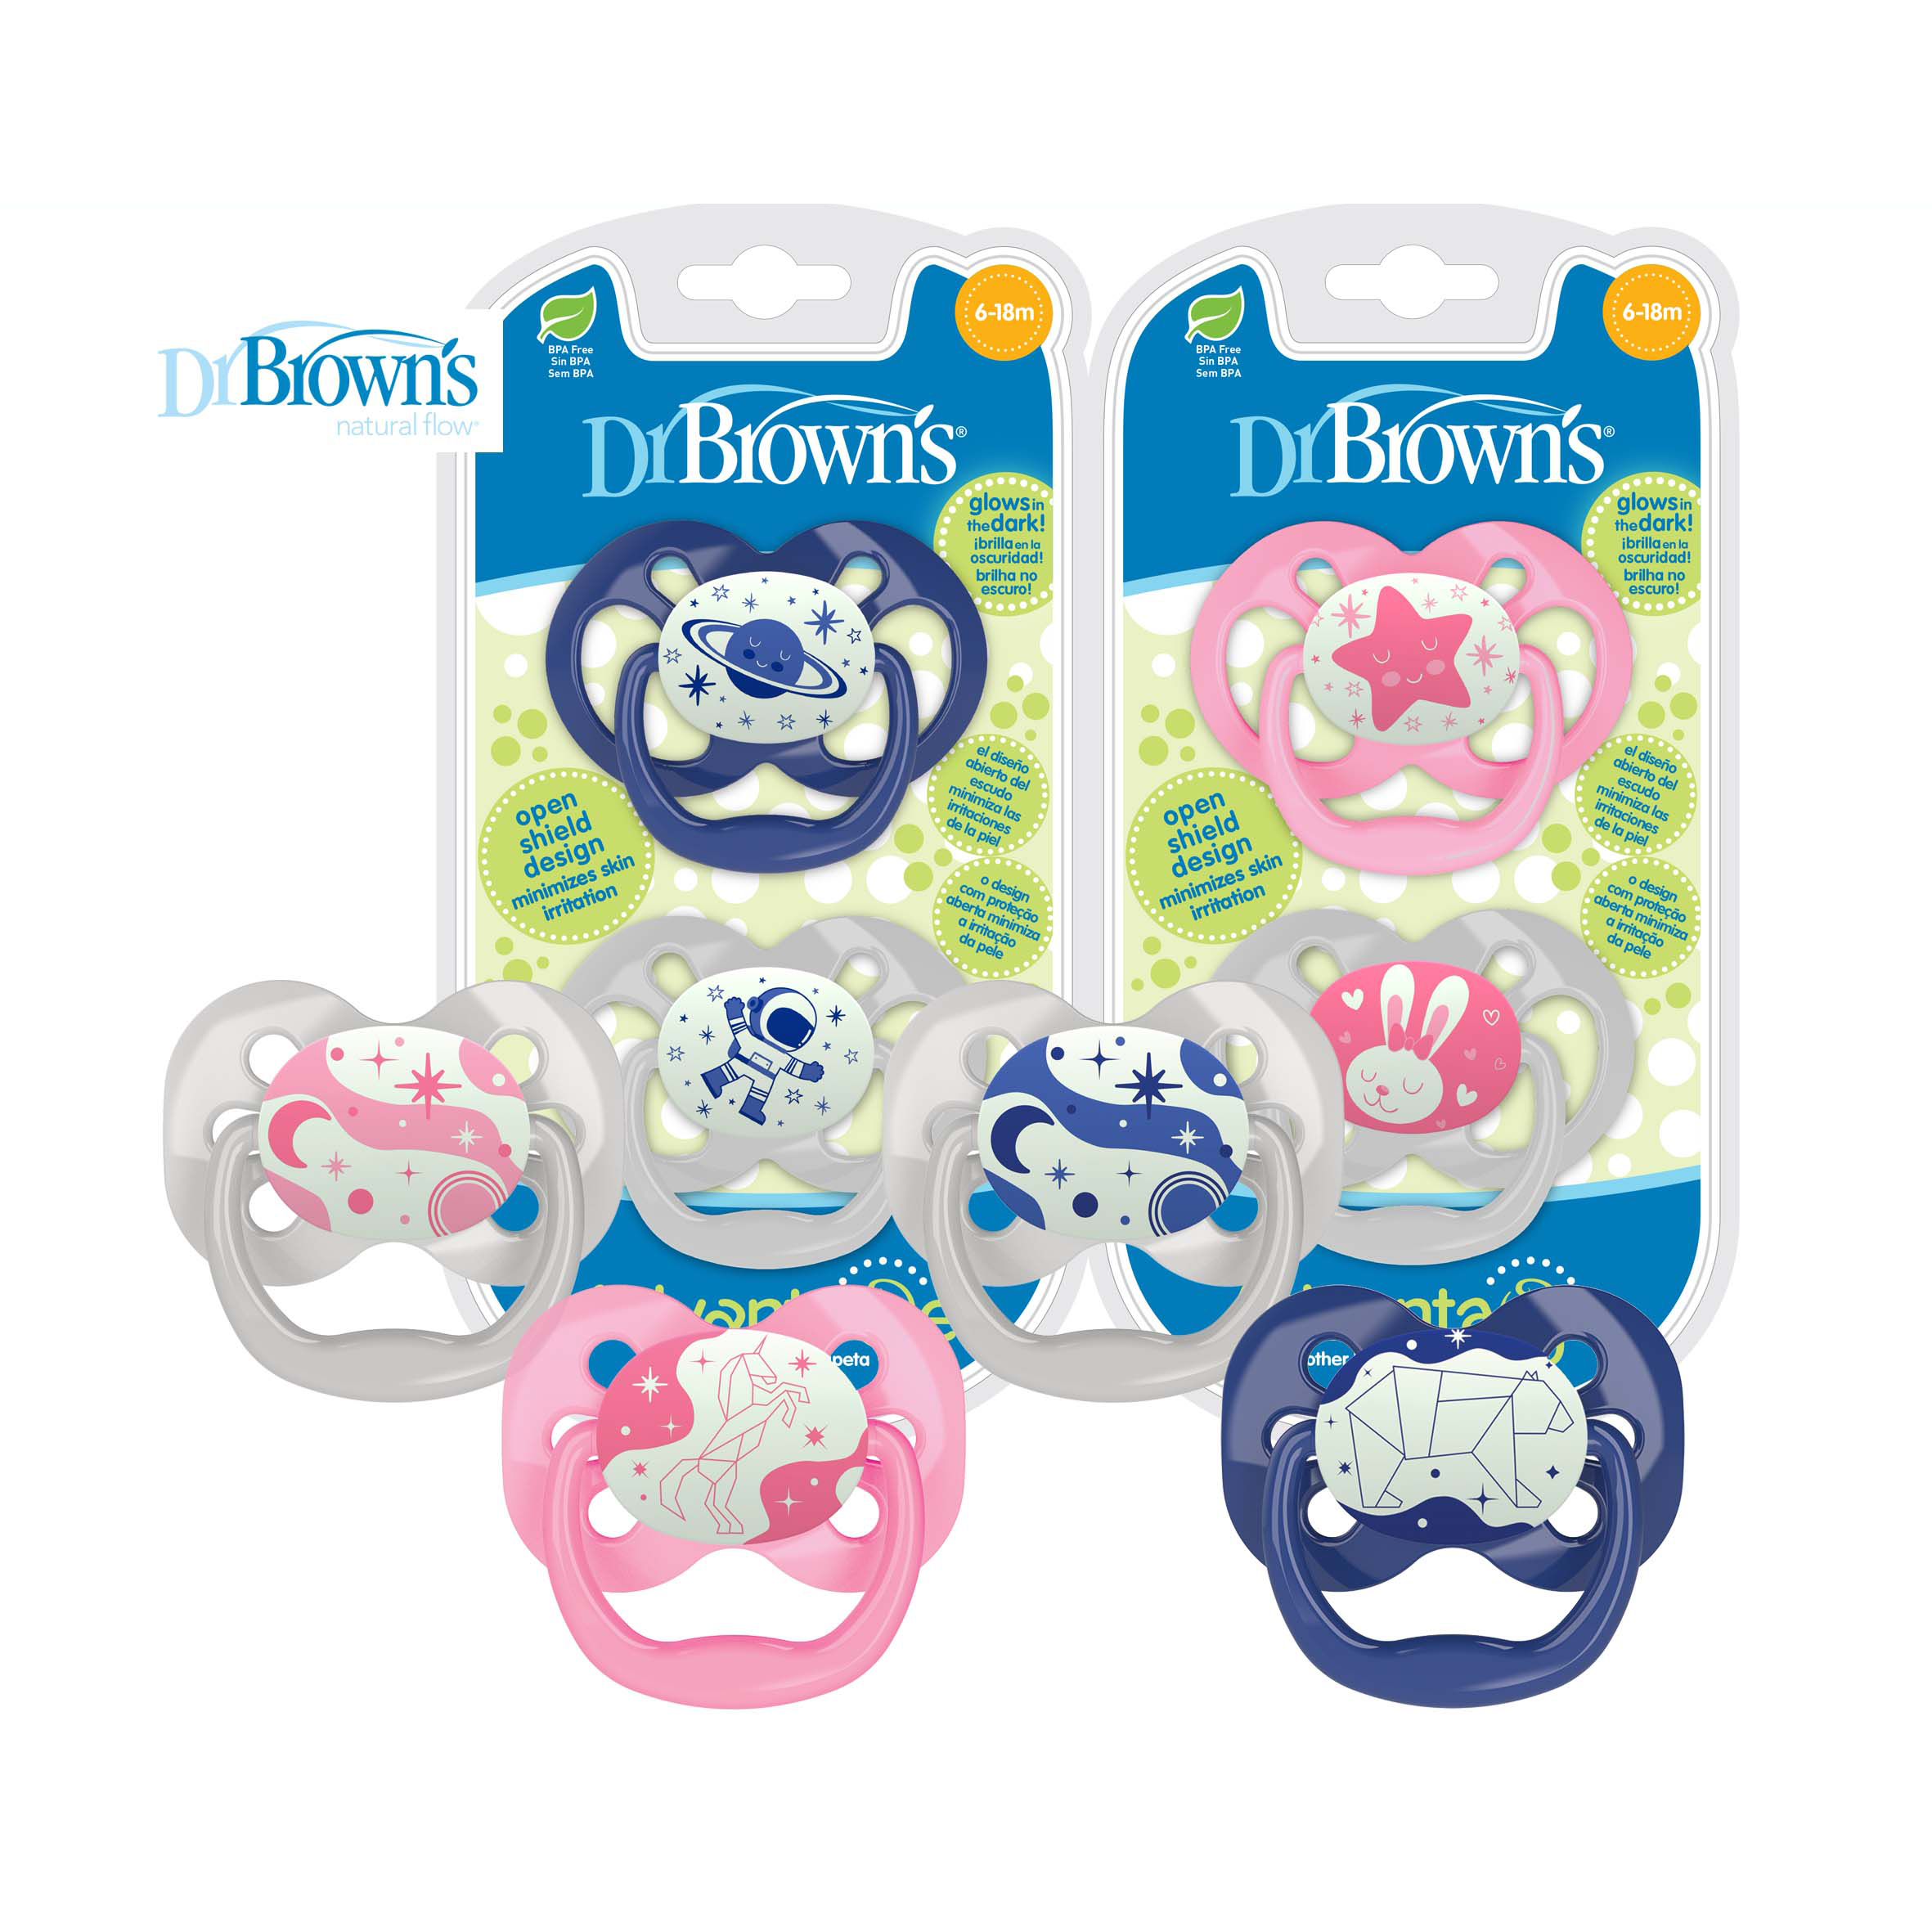 Dr Browns Advantage Glow in the Dark Pacifier, 2pcs